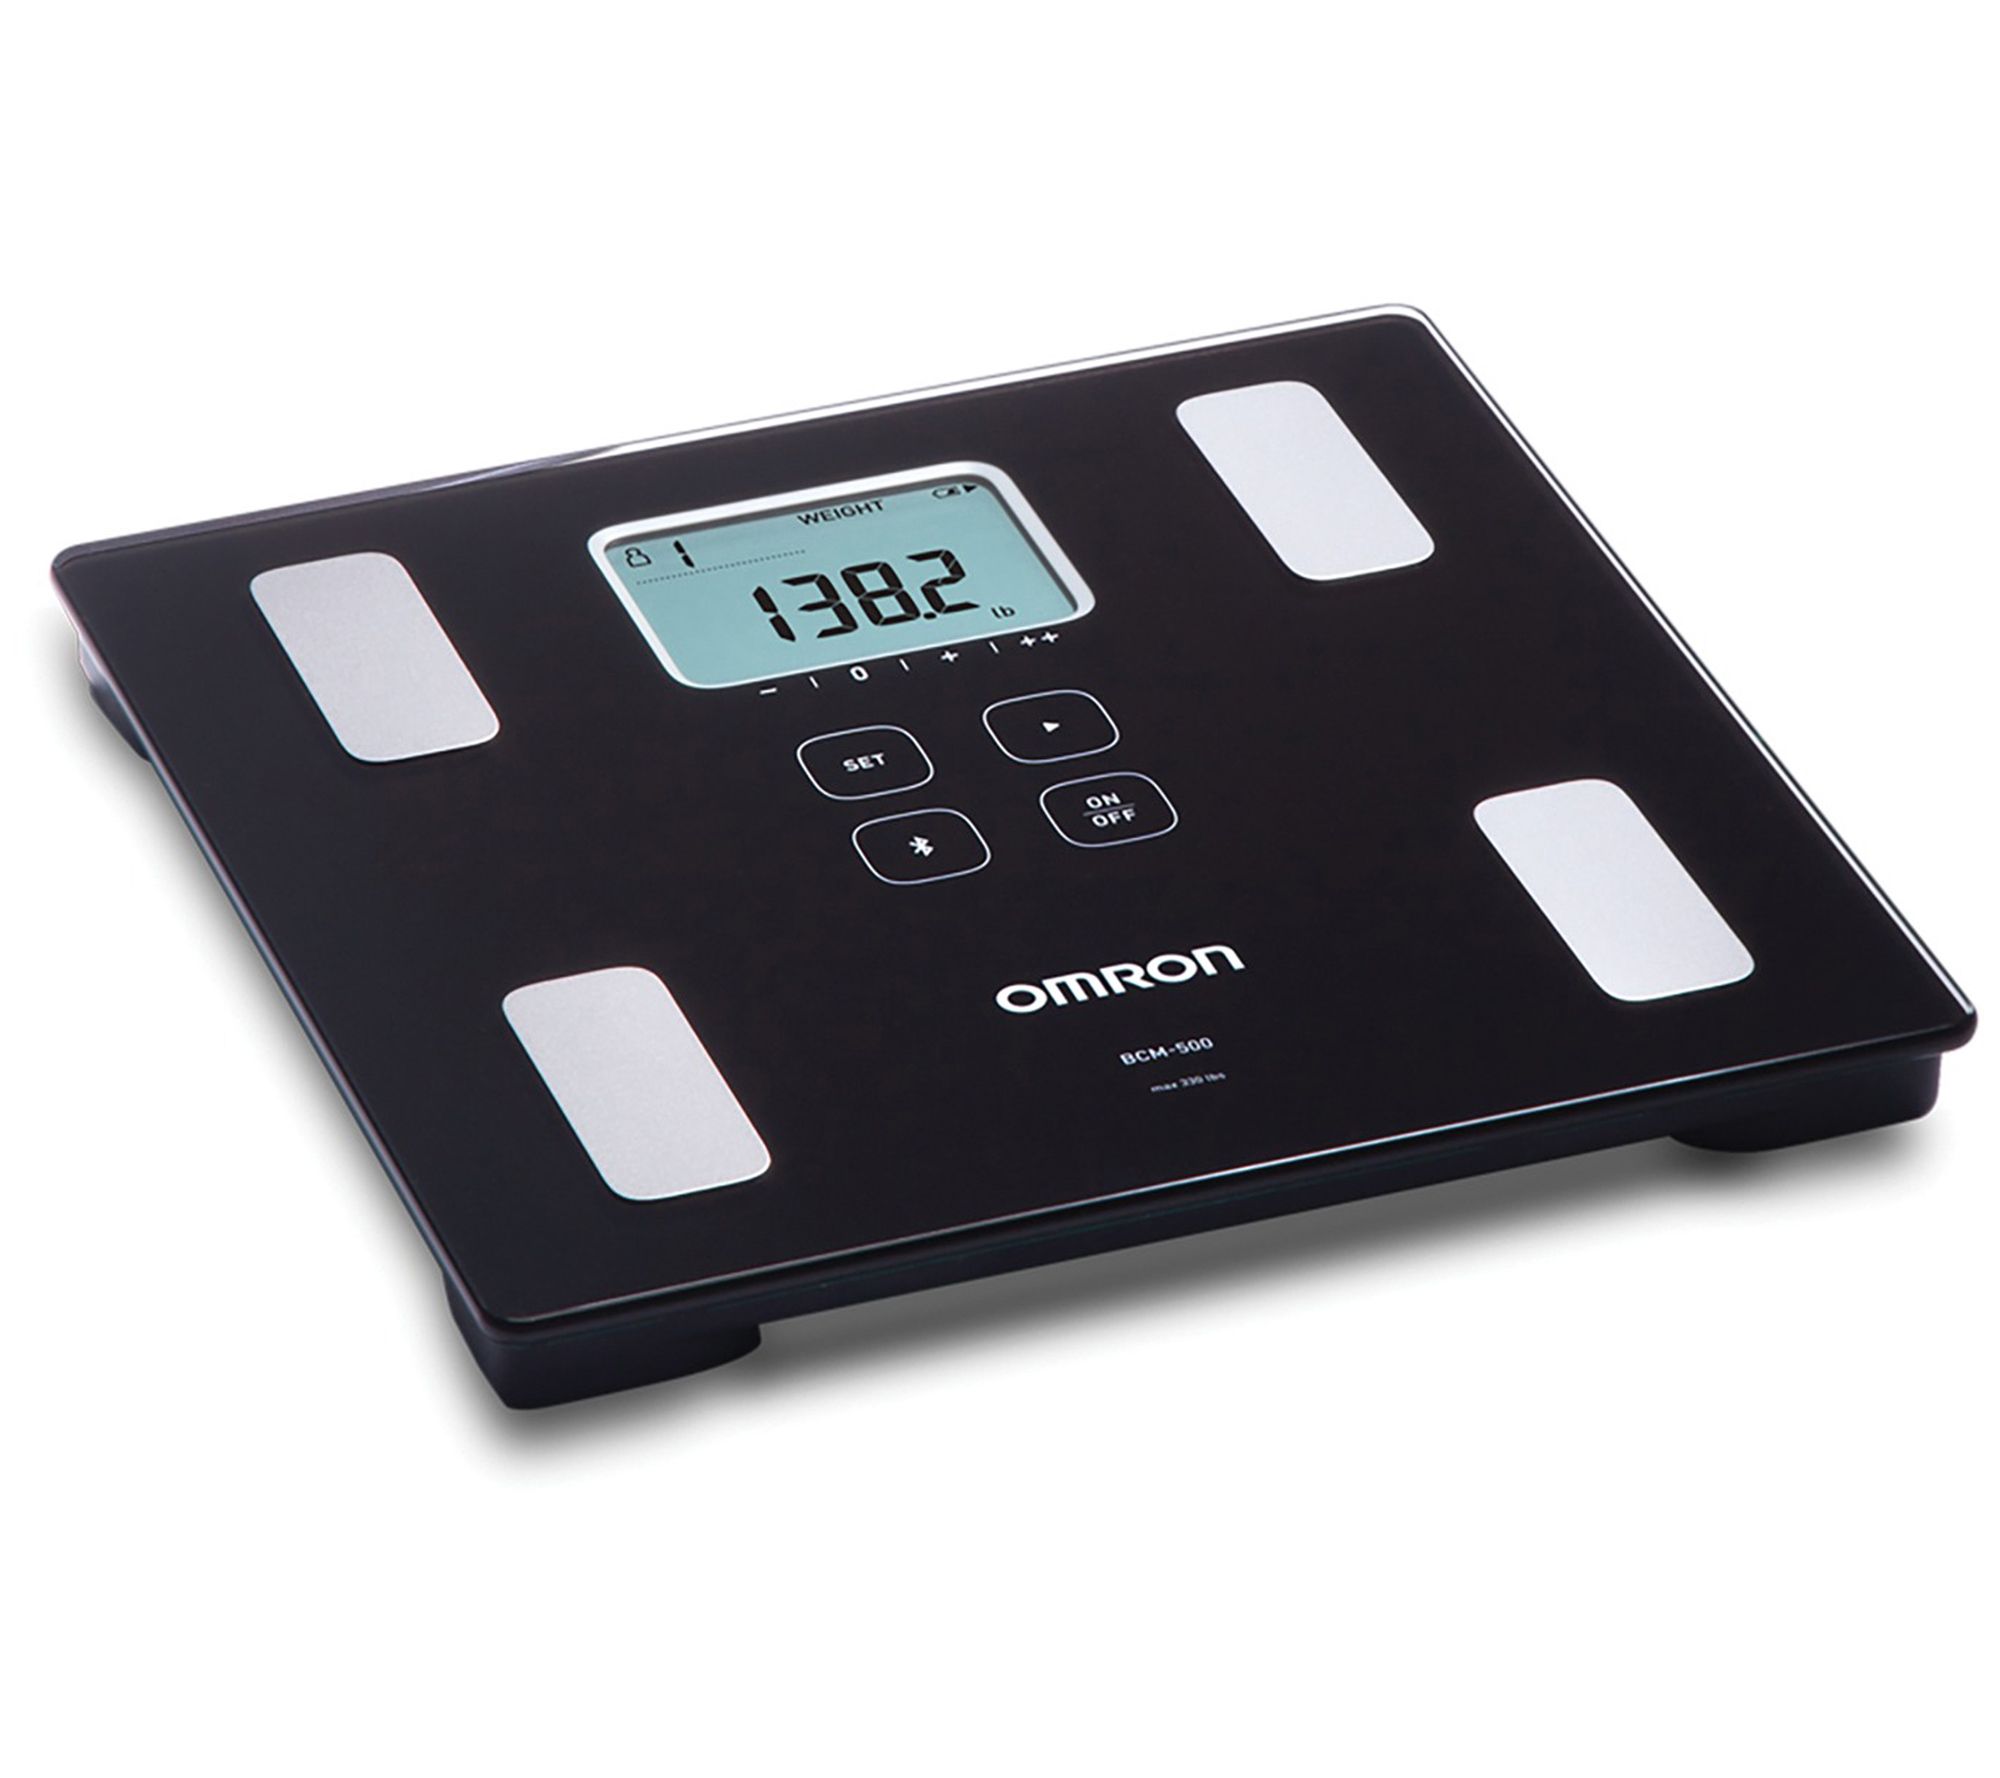 Escali Digital Glass Bath Scale for Body Weight, Bathroom Body Scale, High  Capacity of 400 lb, Battery Included, Clear Round Platform